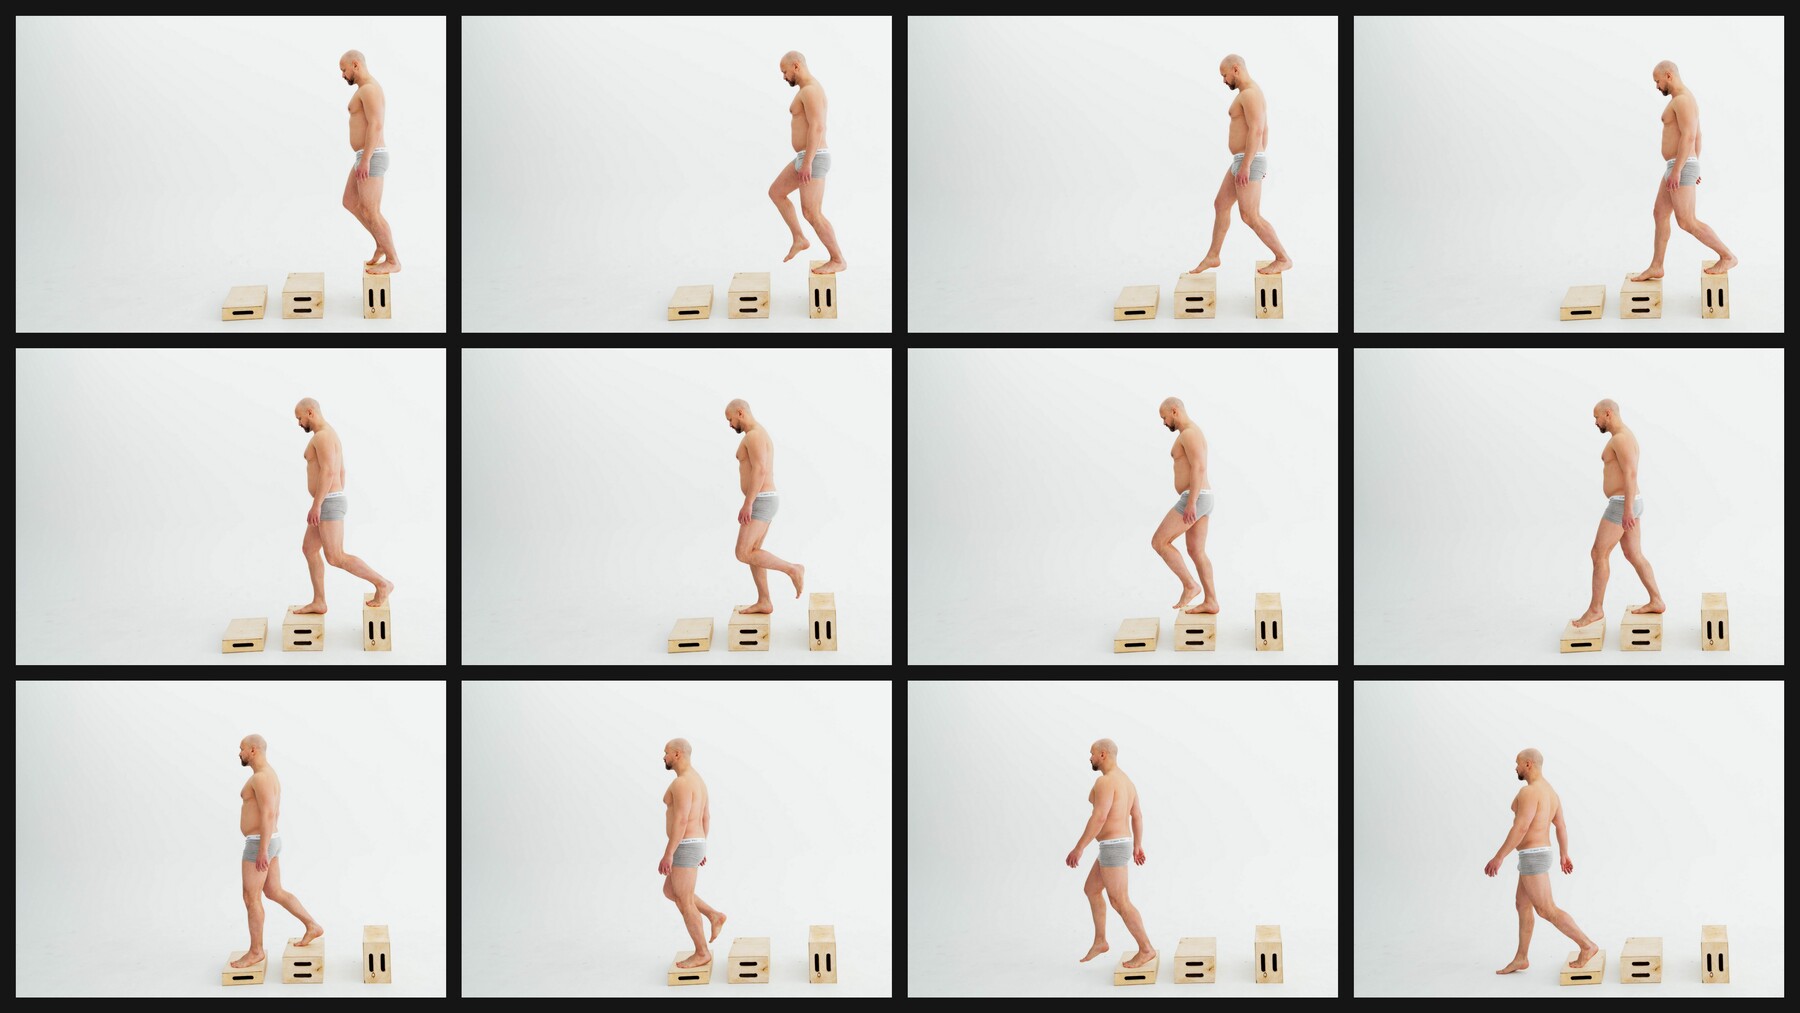 250+ Reference Photos - Female Body in Motion ( Sequential Movement )